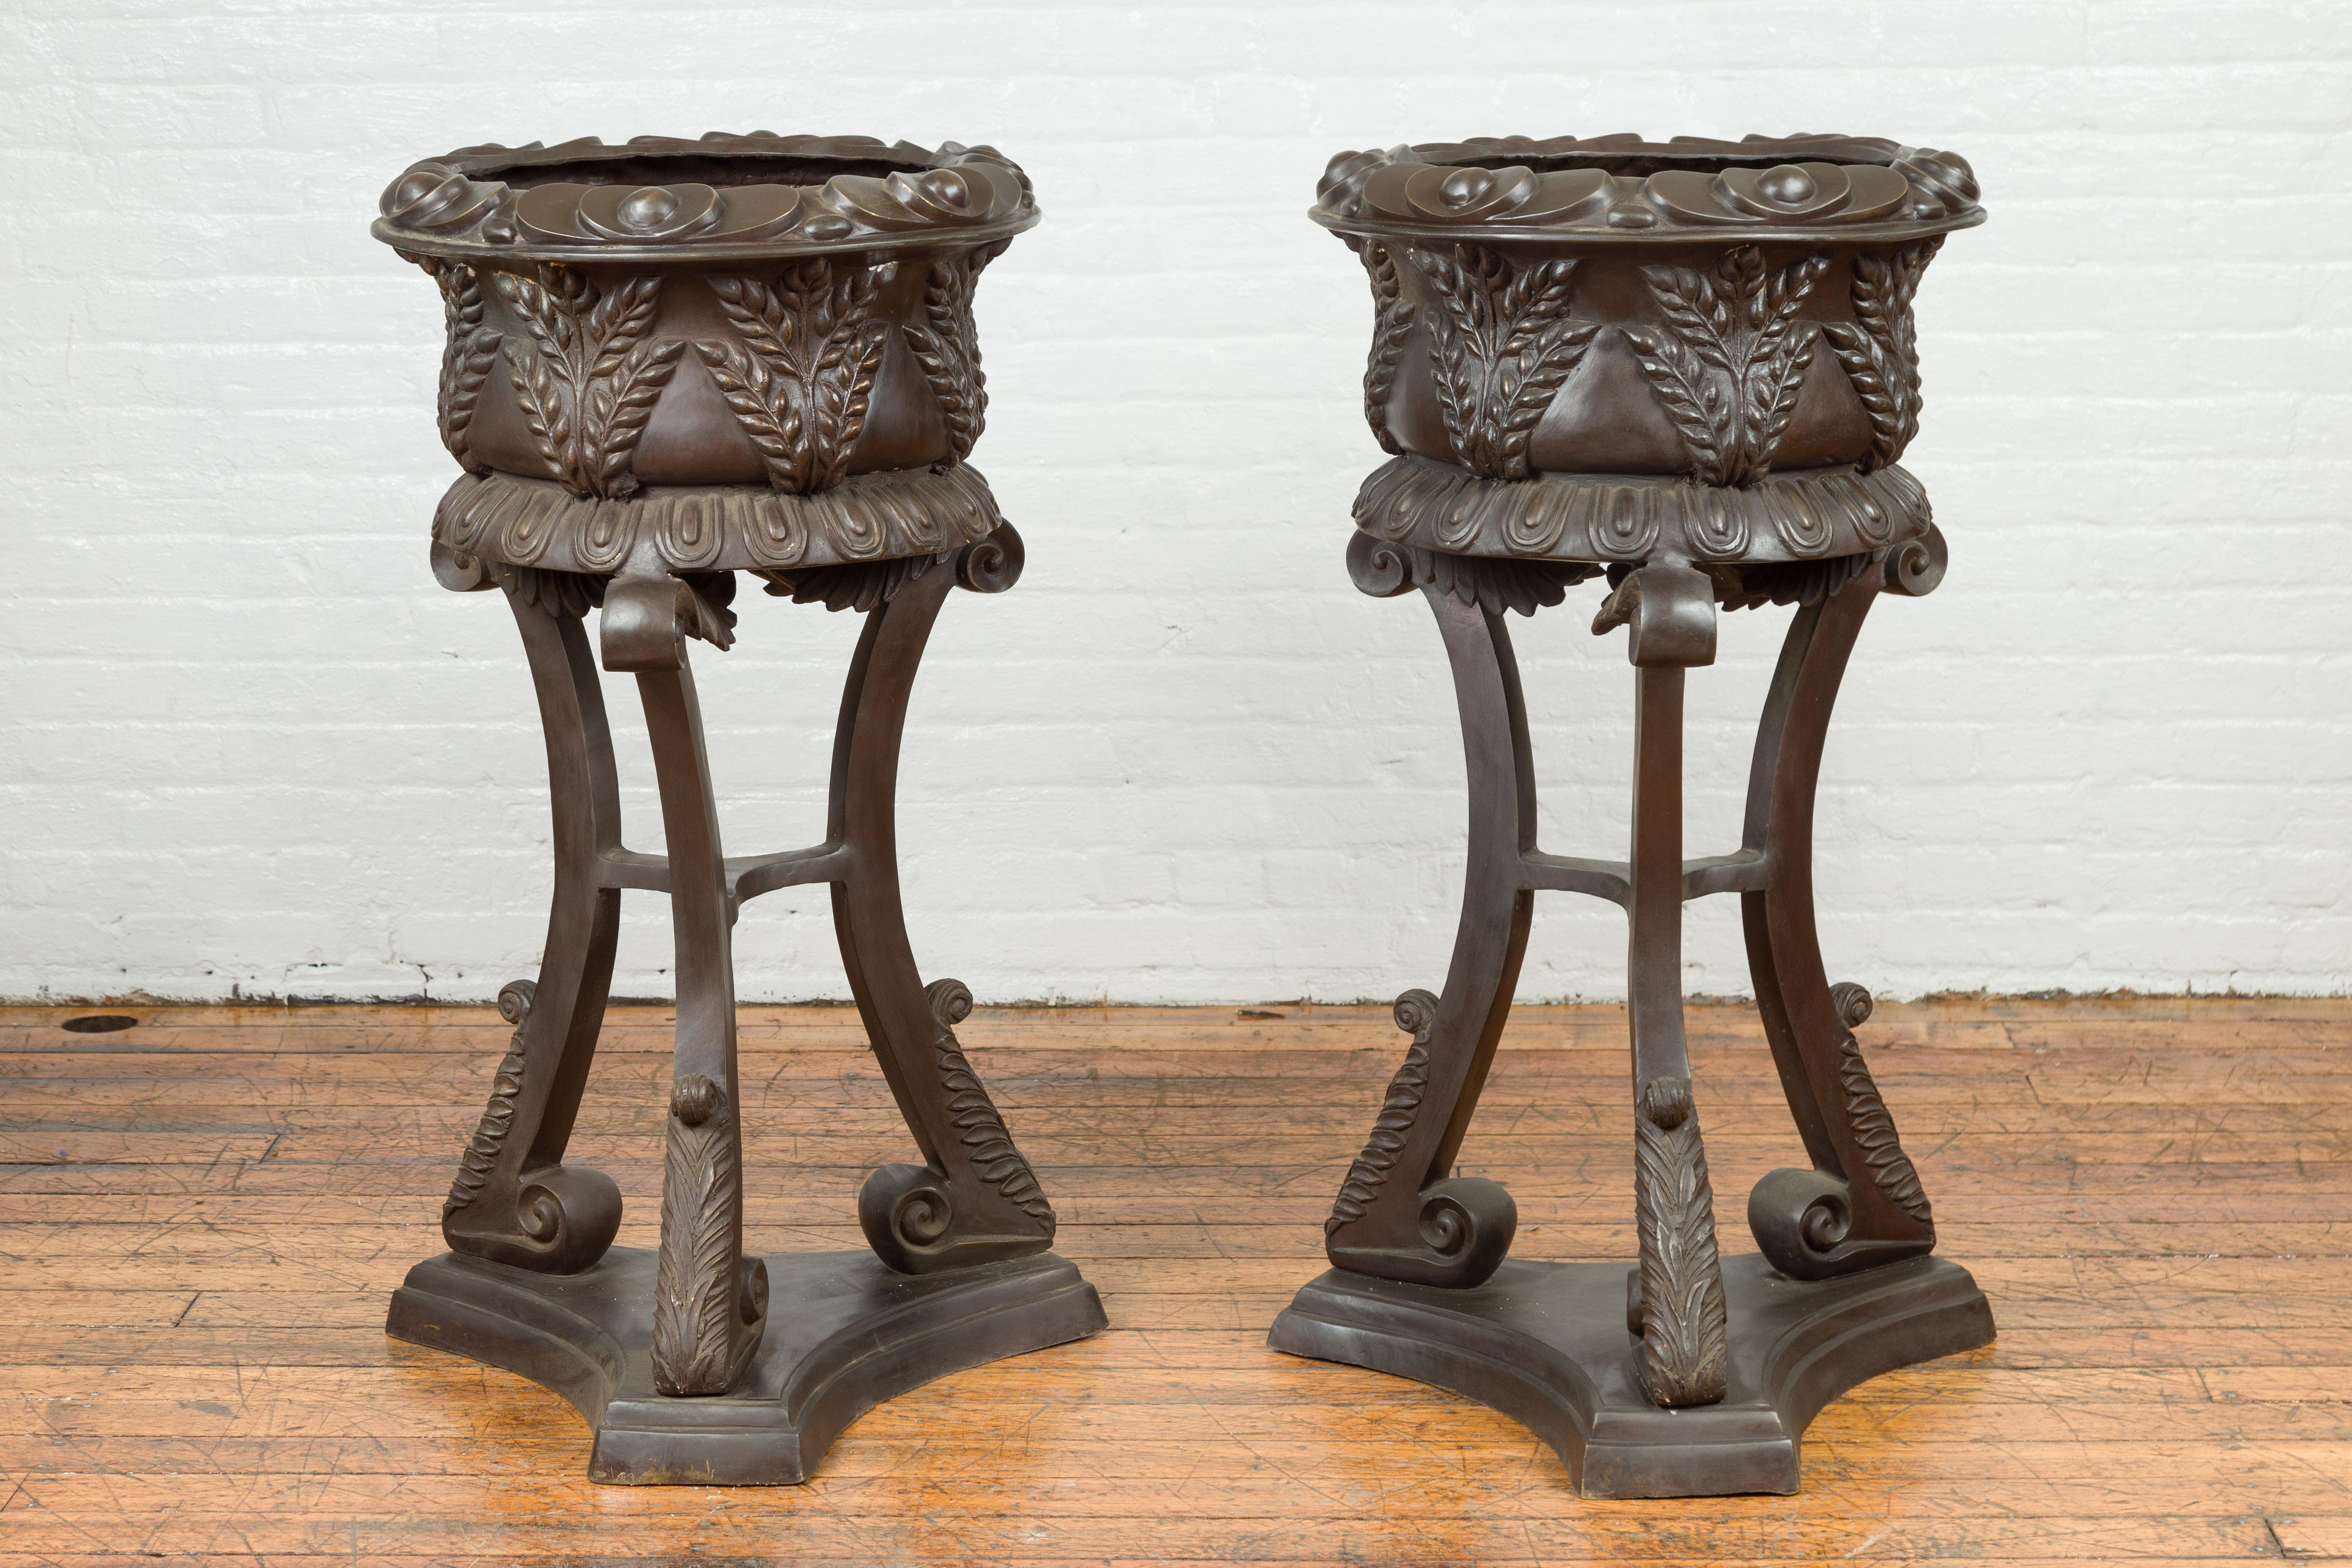 A tall vintage bronze European style tripod planter with unusual raised floral design and dark bronze patina. Each planter is priced and sold individually. Created with the traditional technique of the lost-wax (à la cire perdue) that allows a great